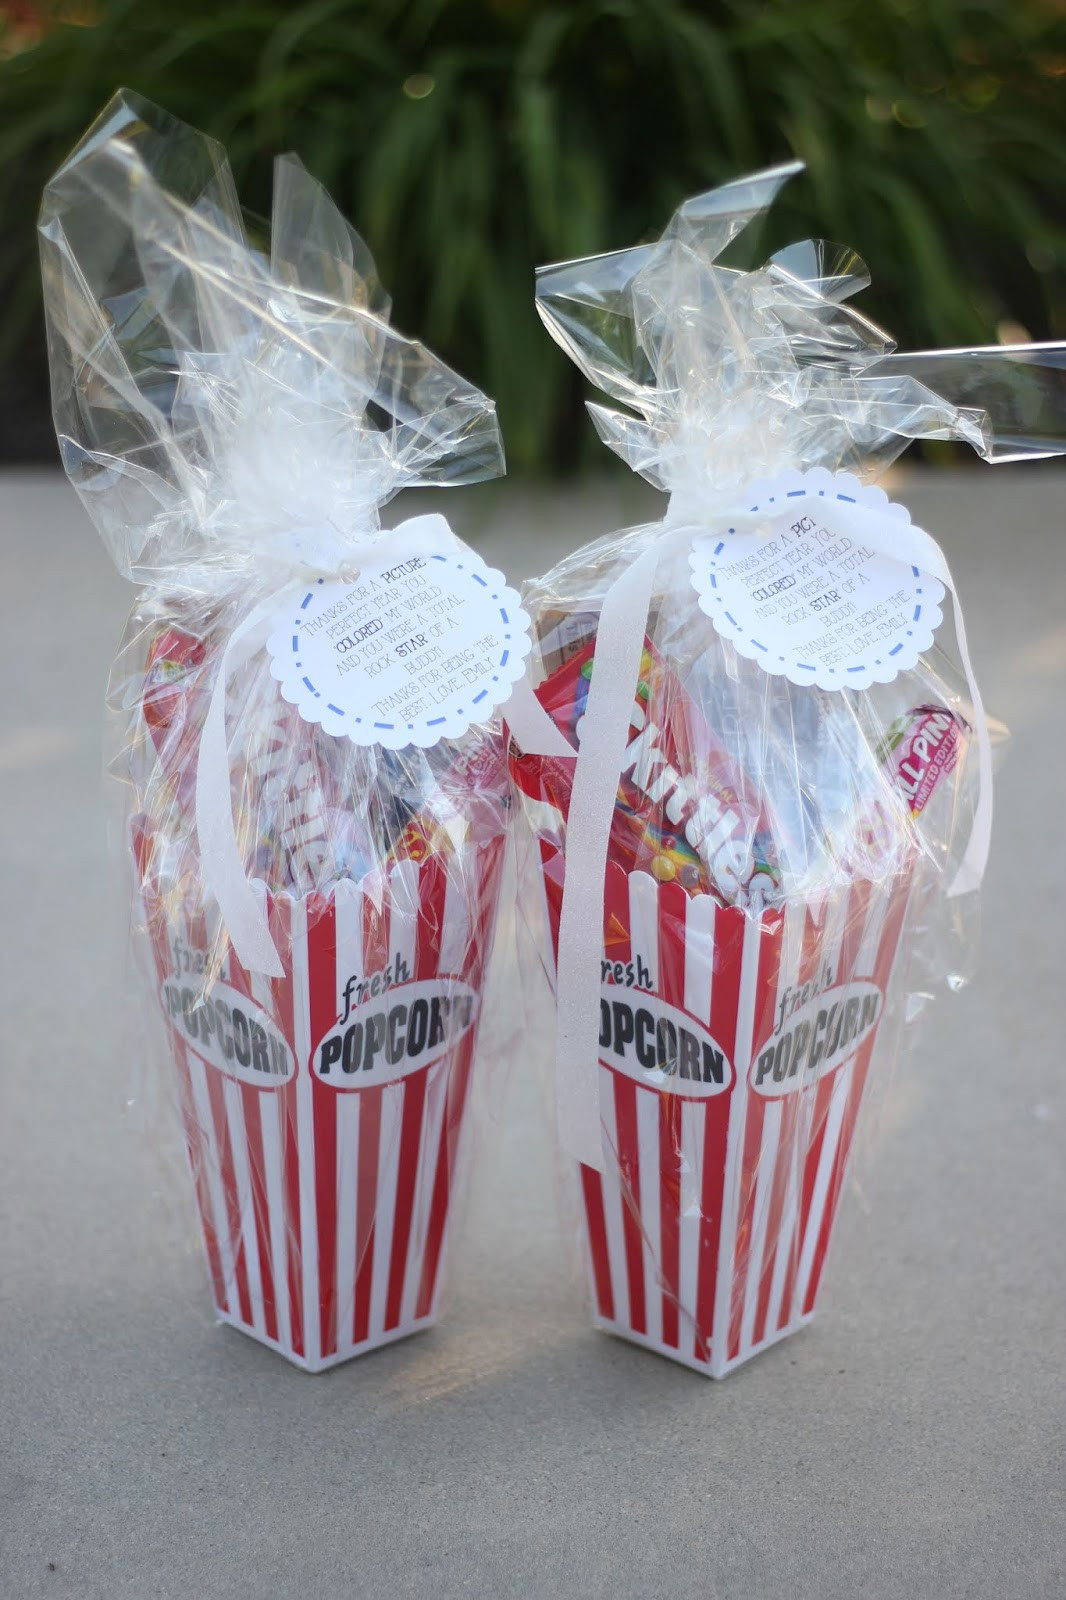 Popcorn Movie Gift Basket Ideas
 The Real Housewife of Fresno End of Year Gift Ideas